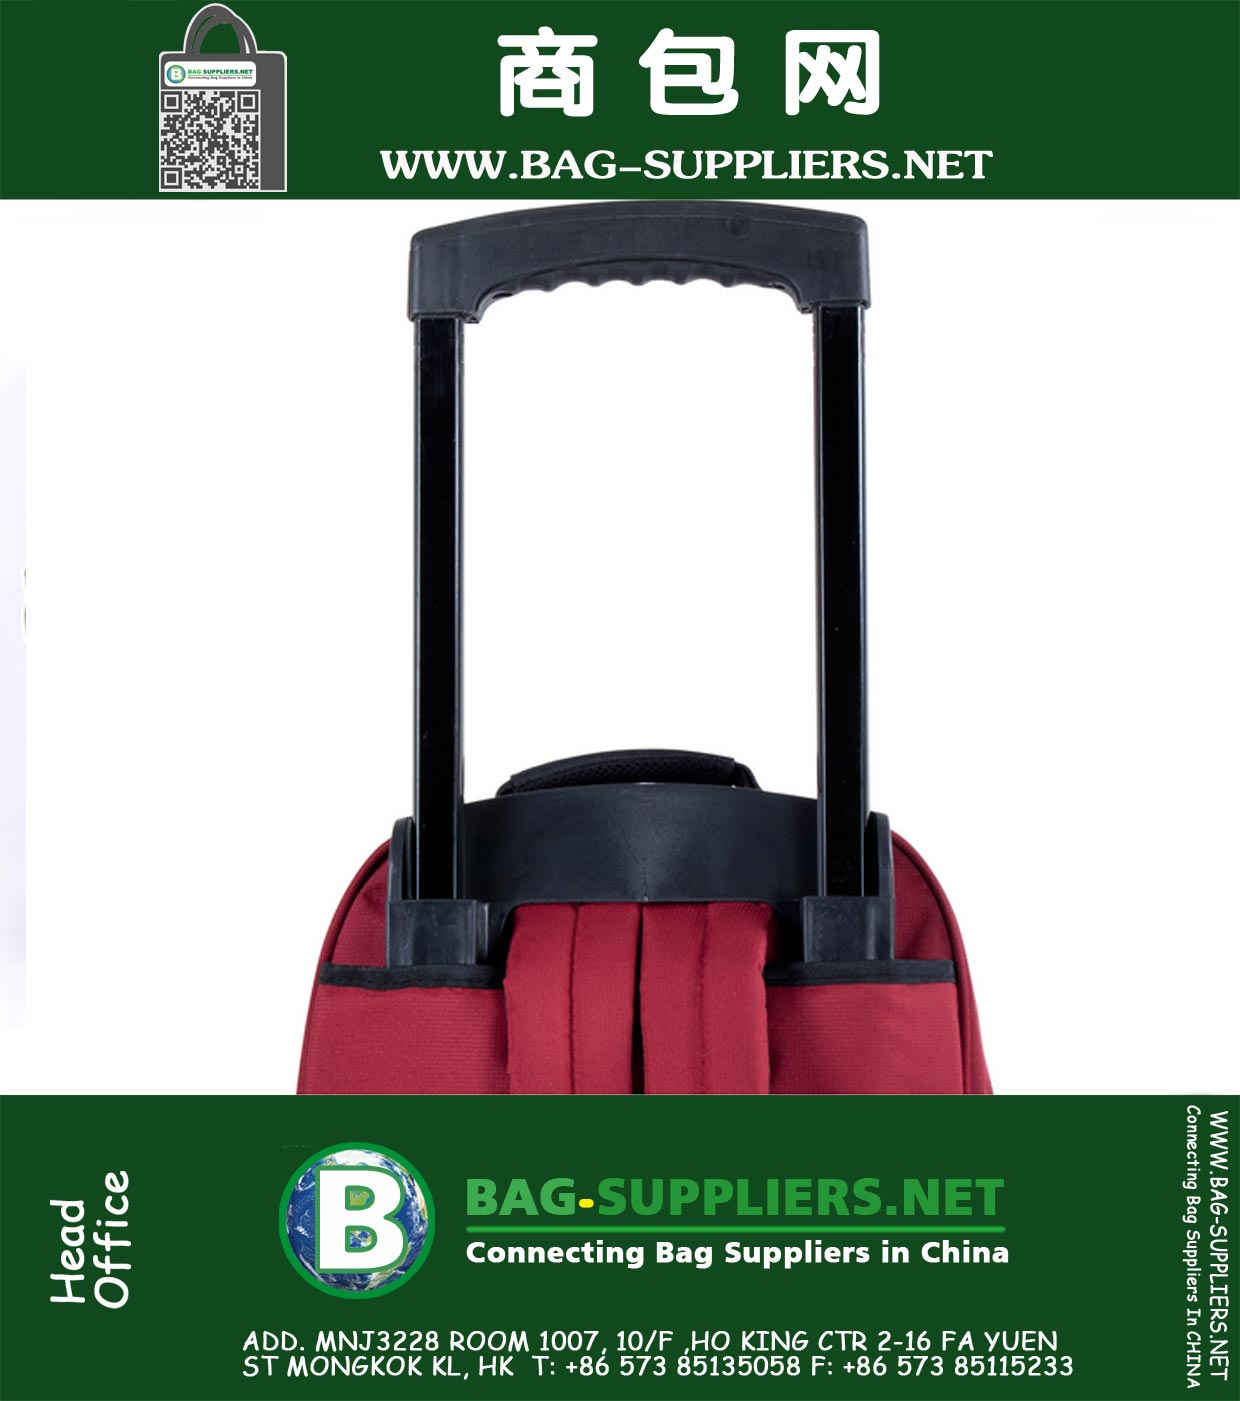 18-inch Rolling Backpack